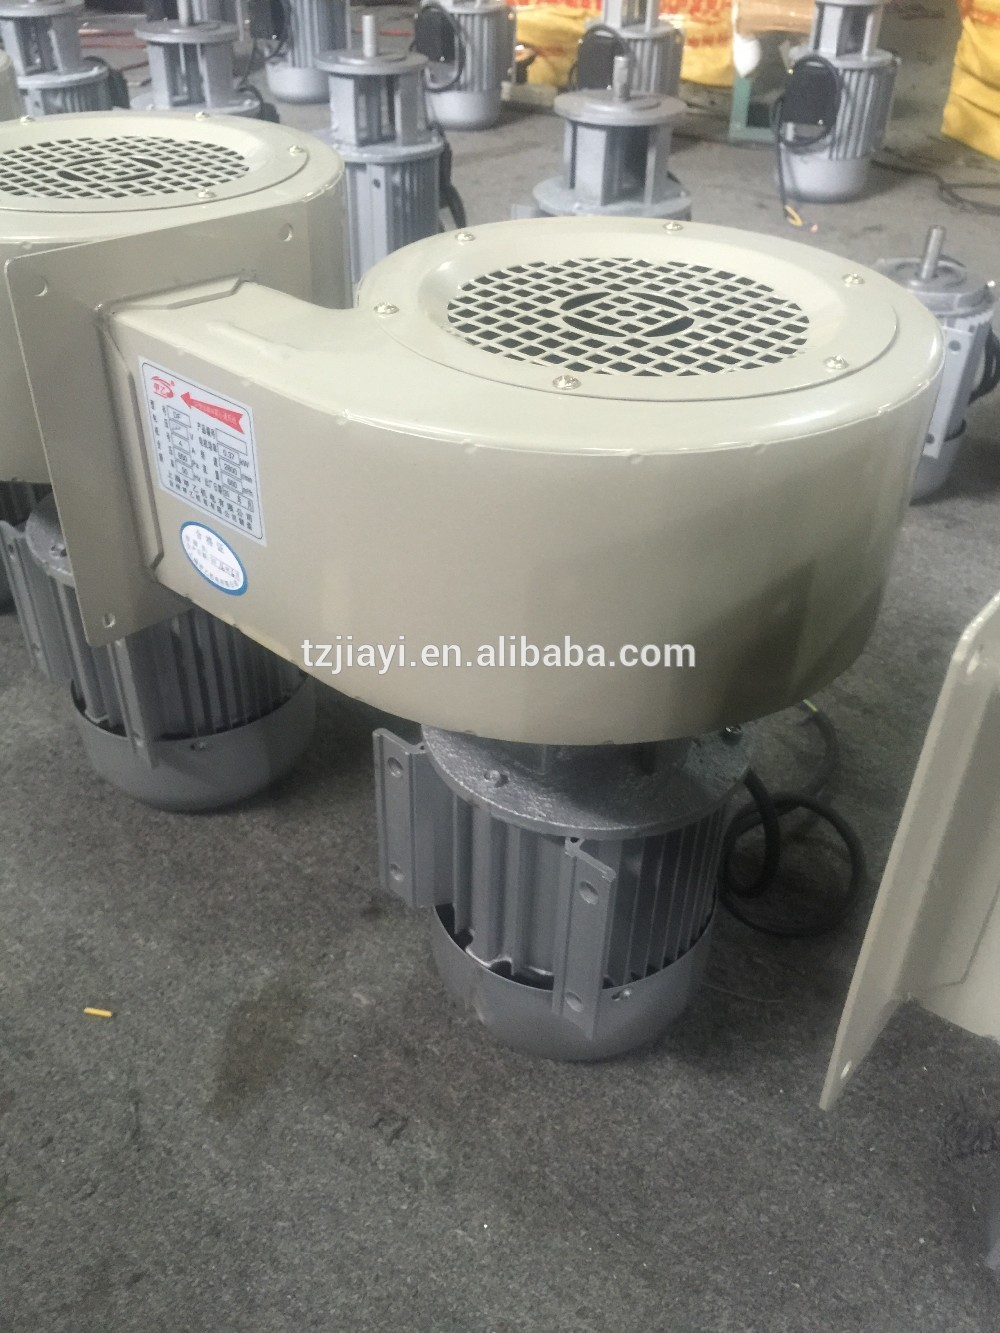 220v380v Electric 500 Cmh Small Exhaust Fan Cast Iron Small High Pressure Blower View 220v380v Electric 500 Cmh Small Exhaust Fan Cast Iron Small in sizing 1000 X 1333